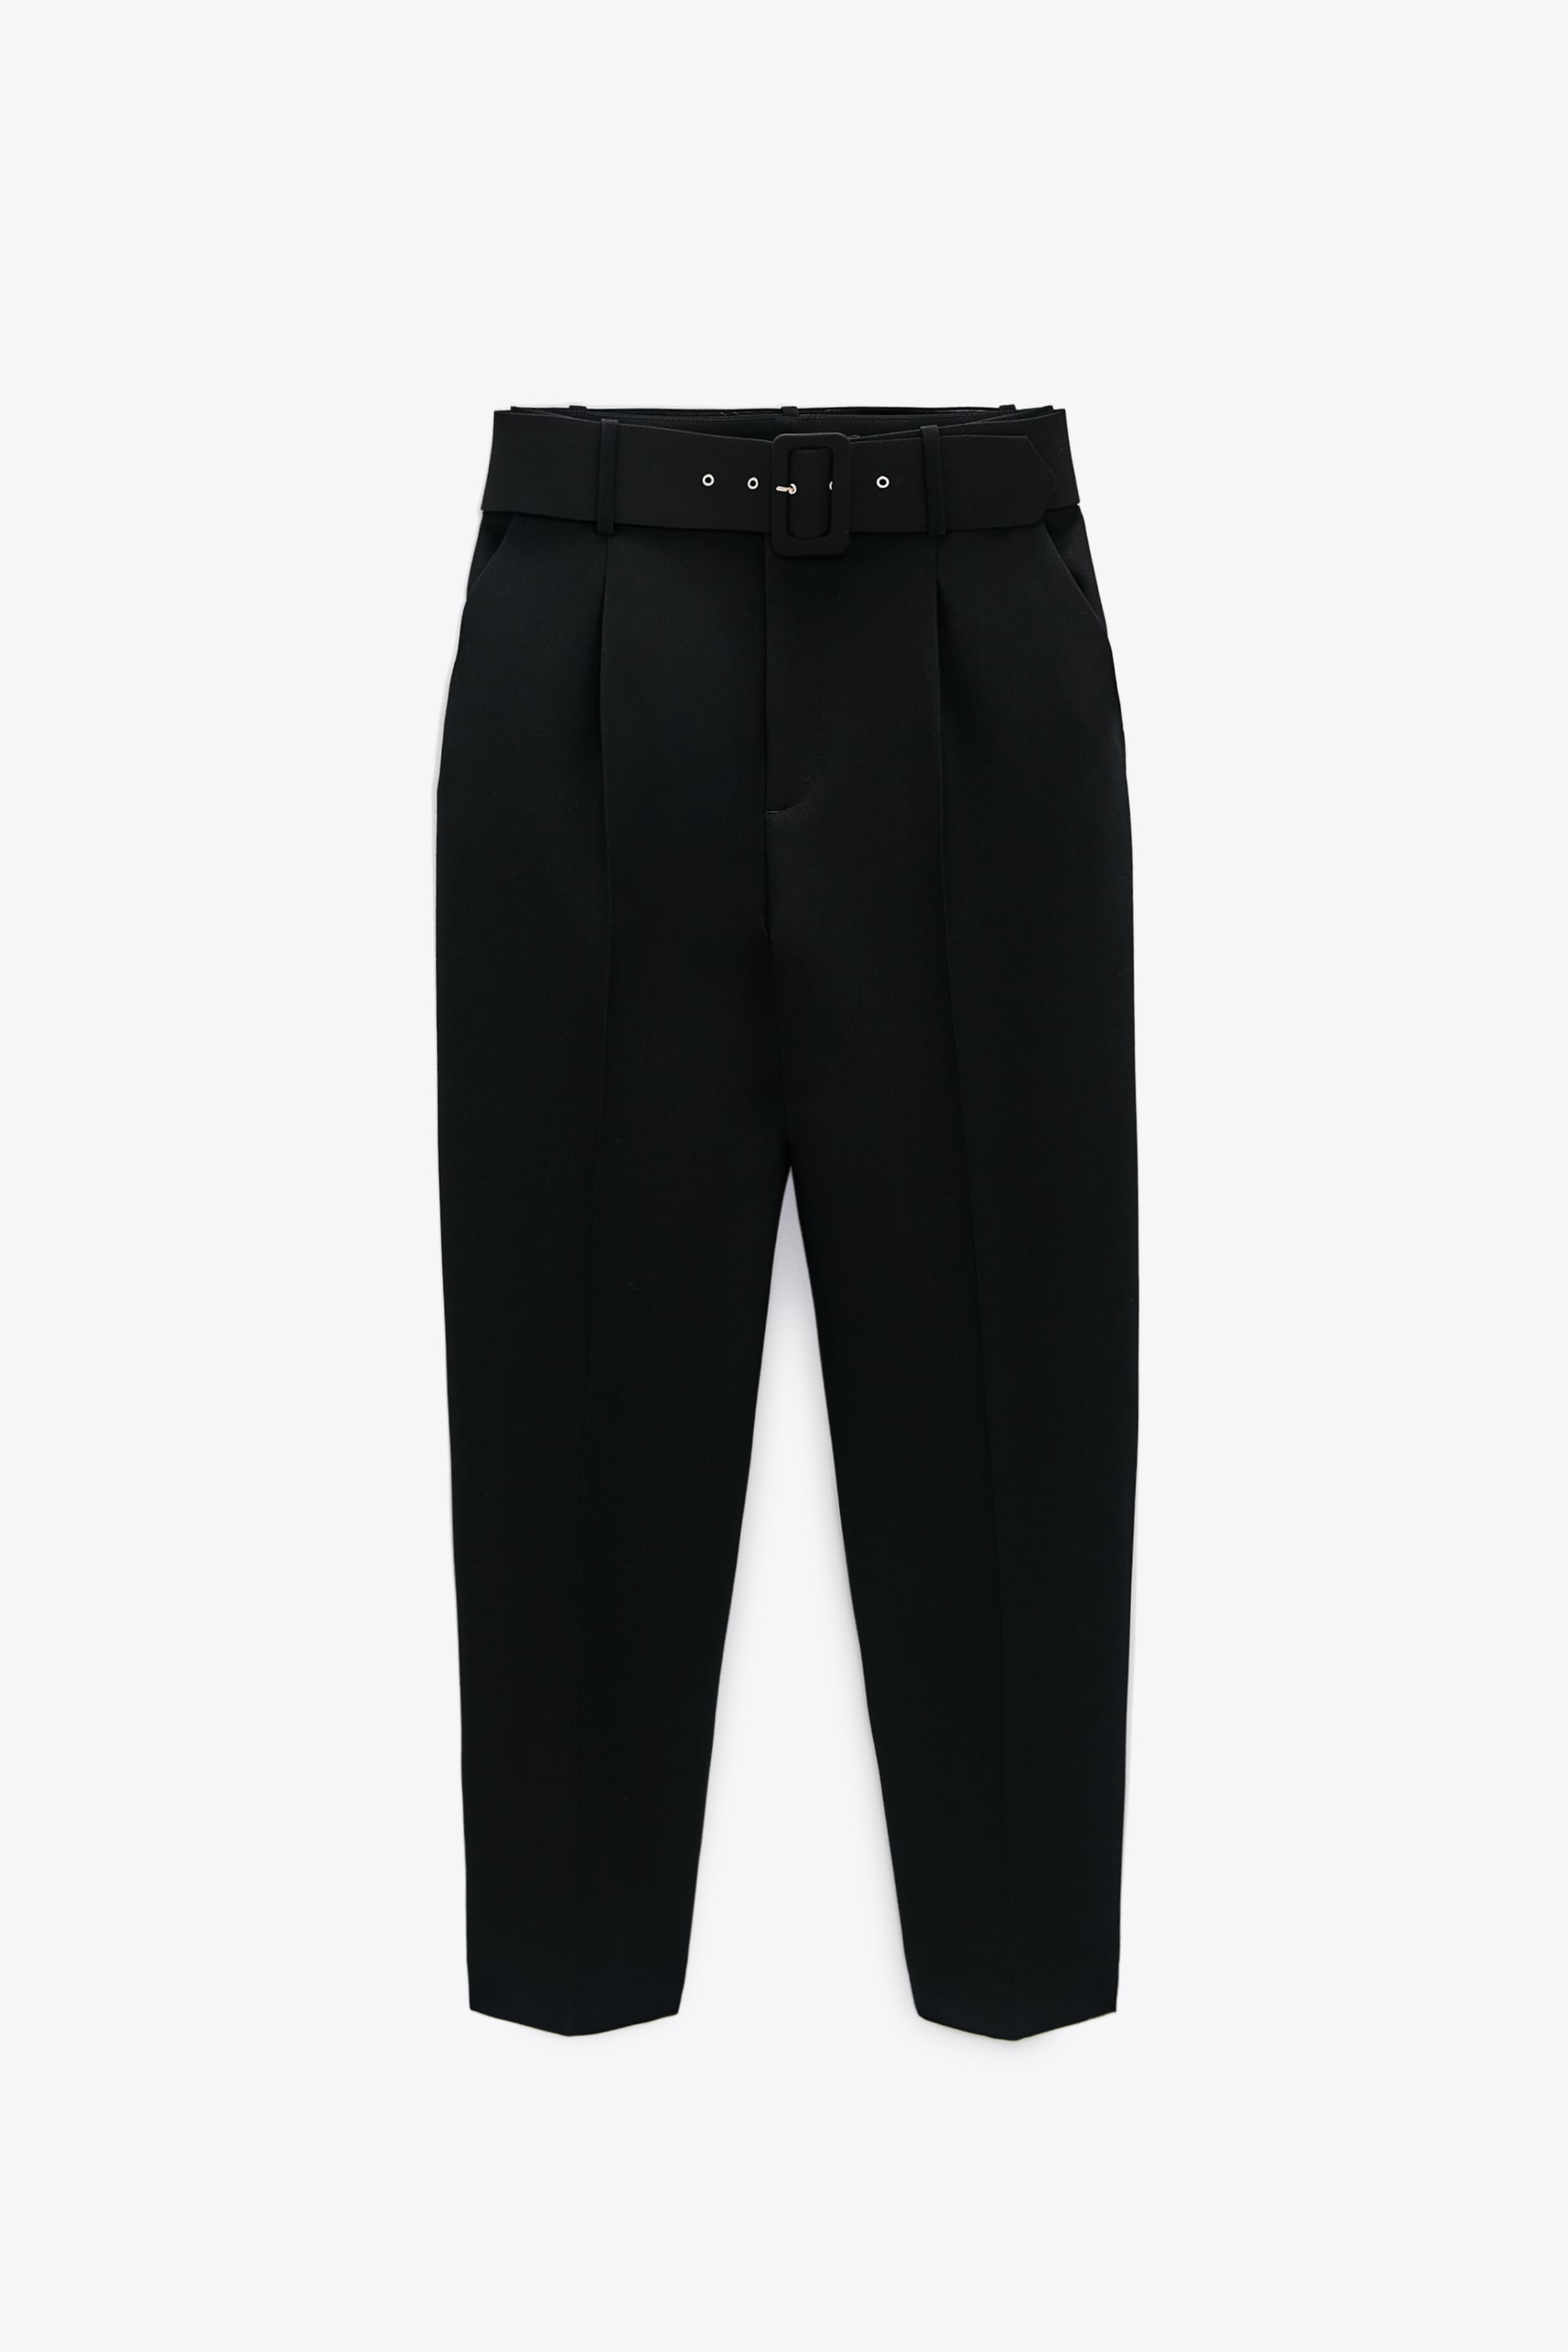 Zara PANTS WITH FABRIC-COVERED BELT - 130185715-800